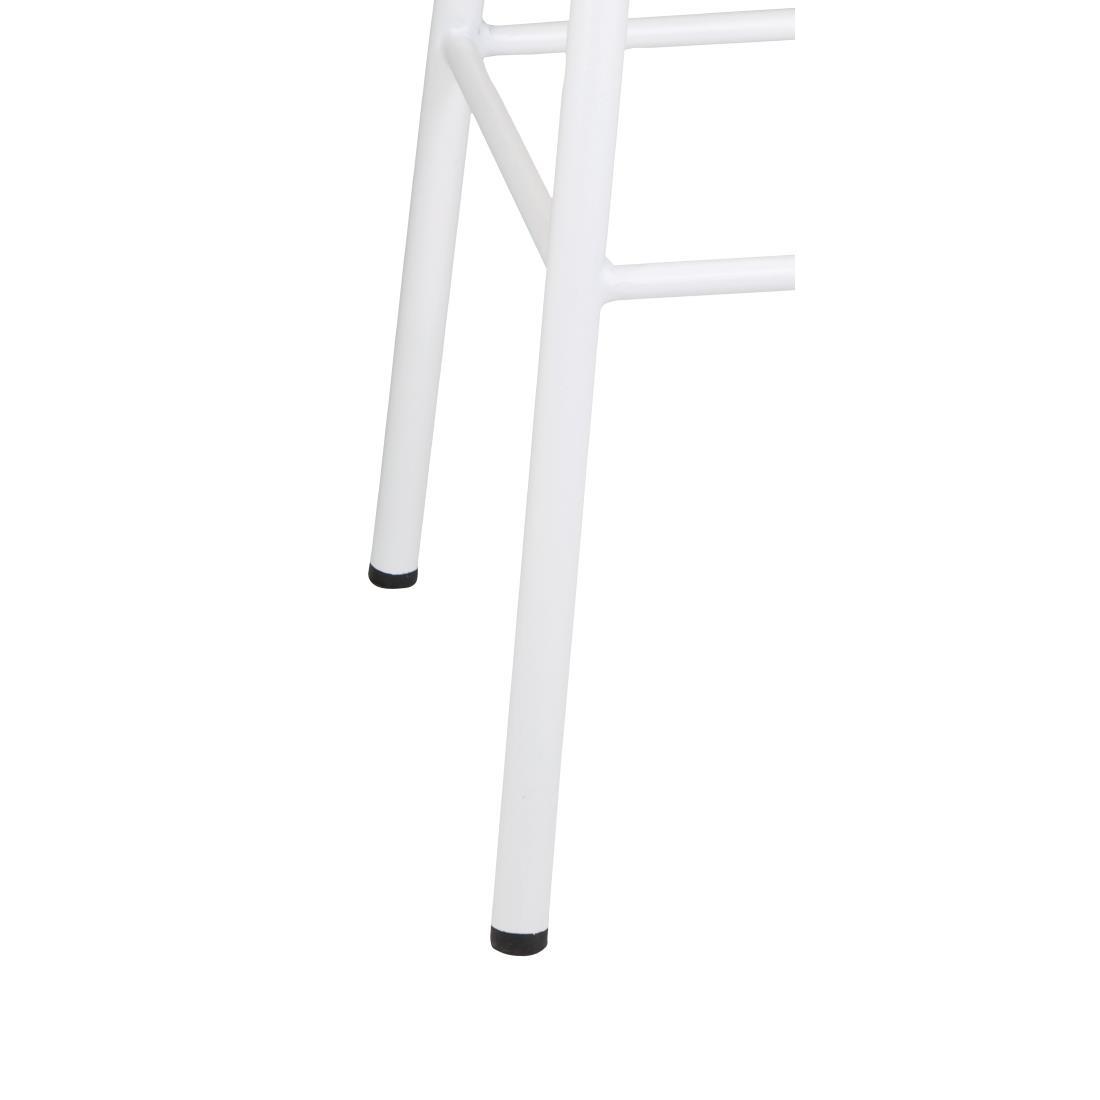 Bolero Cantina High Stools with Wooden Seat Pad White (Pack of 4) - FB939  - 3